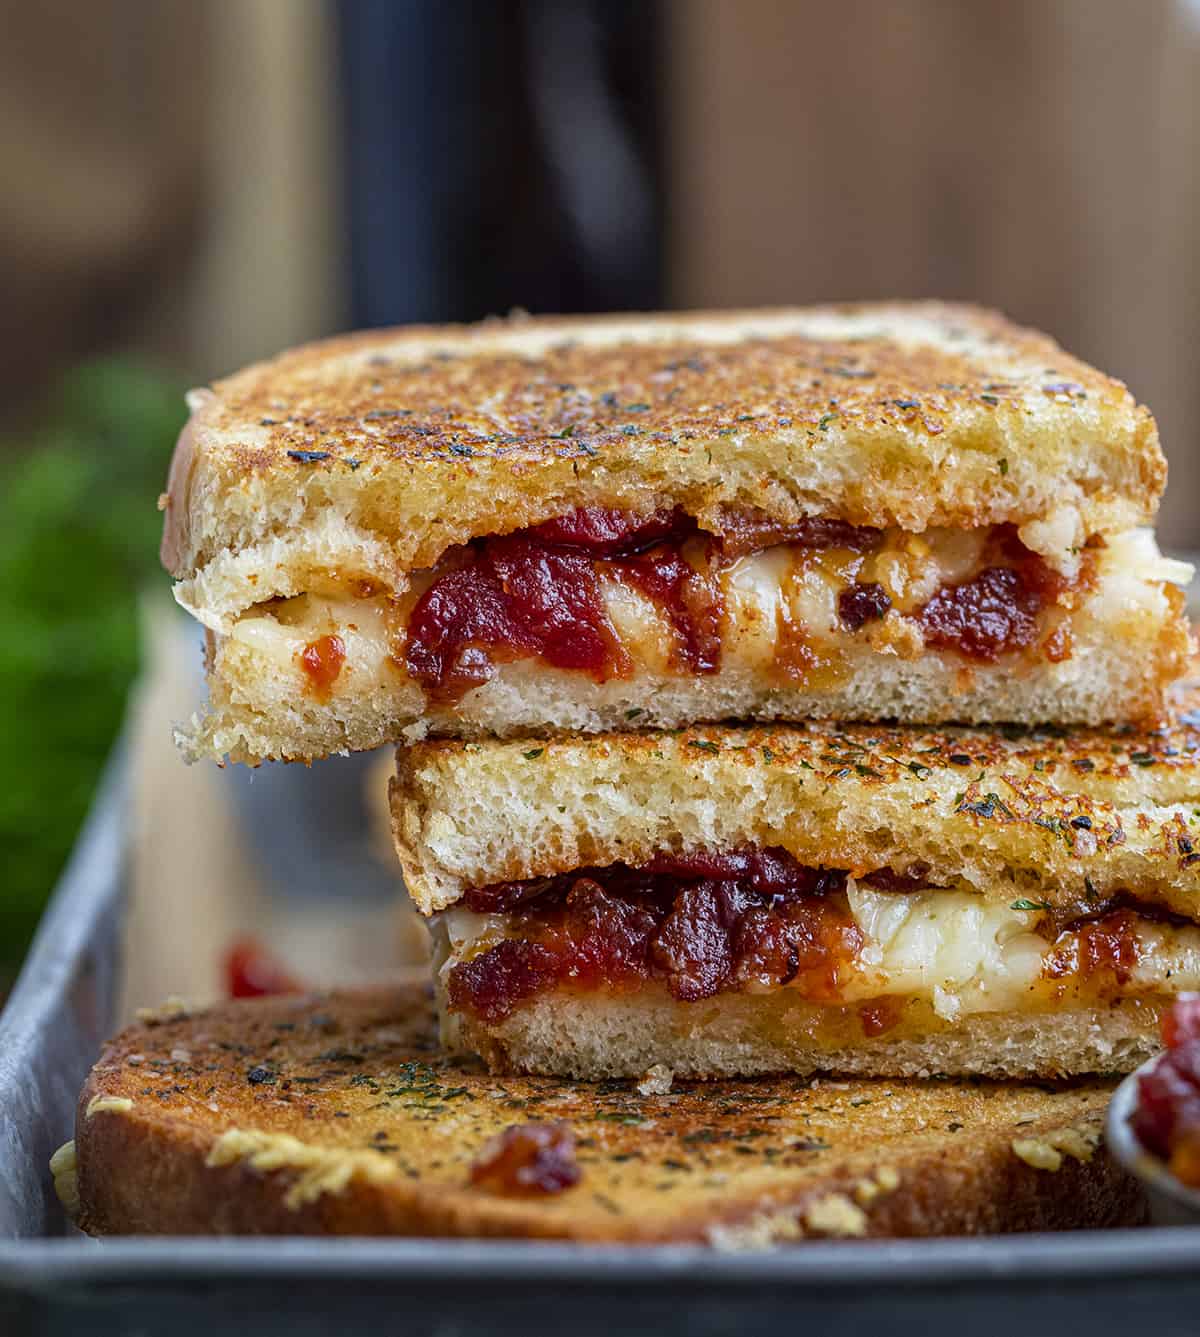 Stacked Bacon Jam Grillled Cheese. Appetizer, Dinner, Supper, Grilled Cheese, Sandwich, Cheese Sandwich, Super Bowl Food,Game Day Food, Best Sandwich Ever, i ma homesteader, iamhomesteader